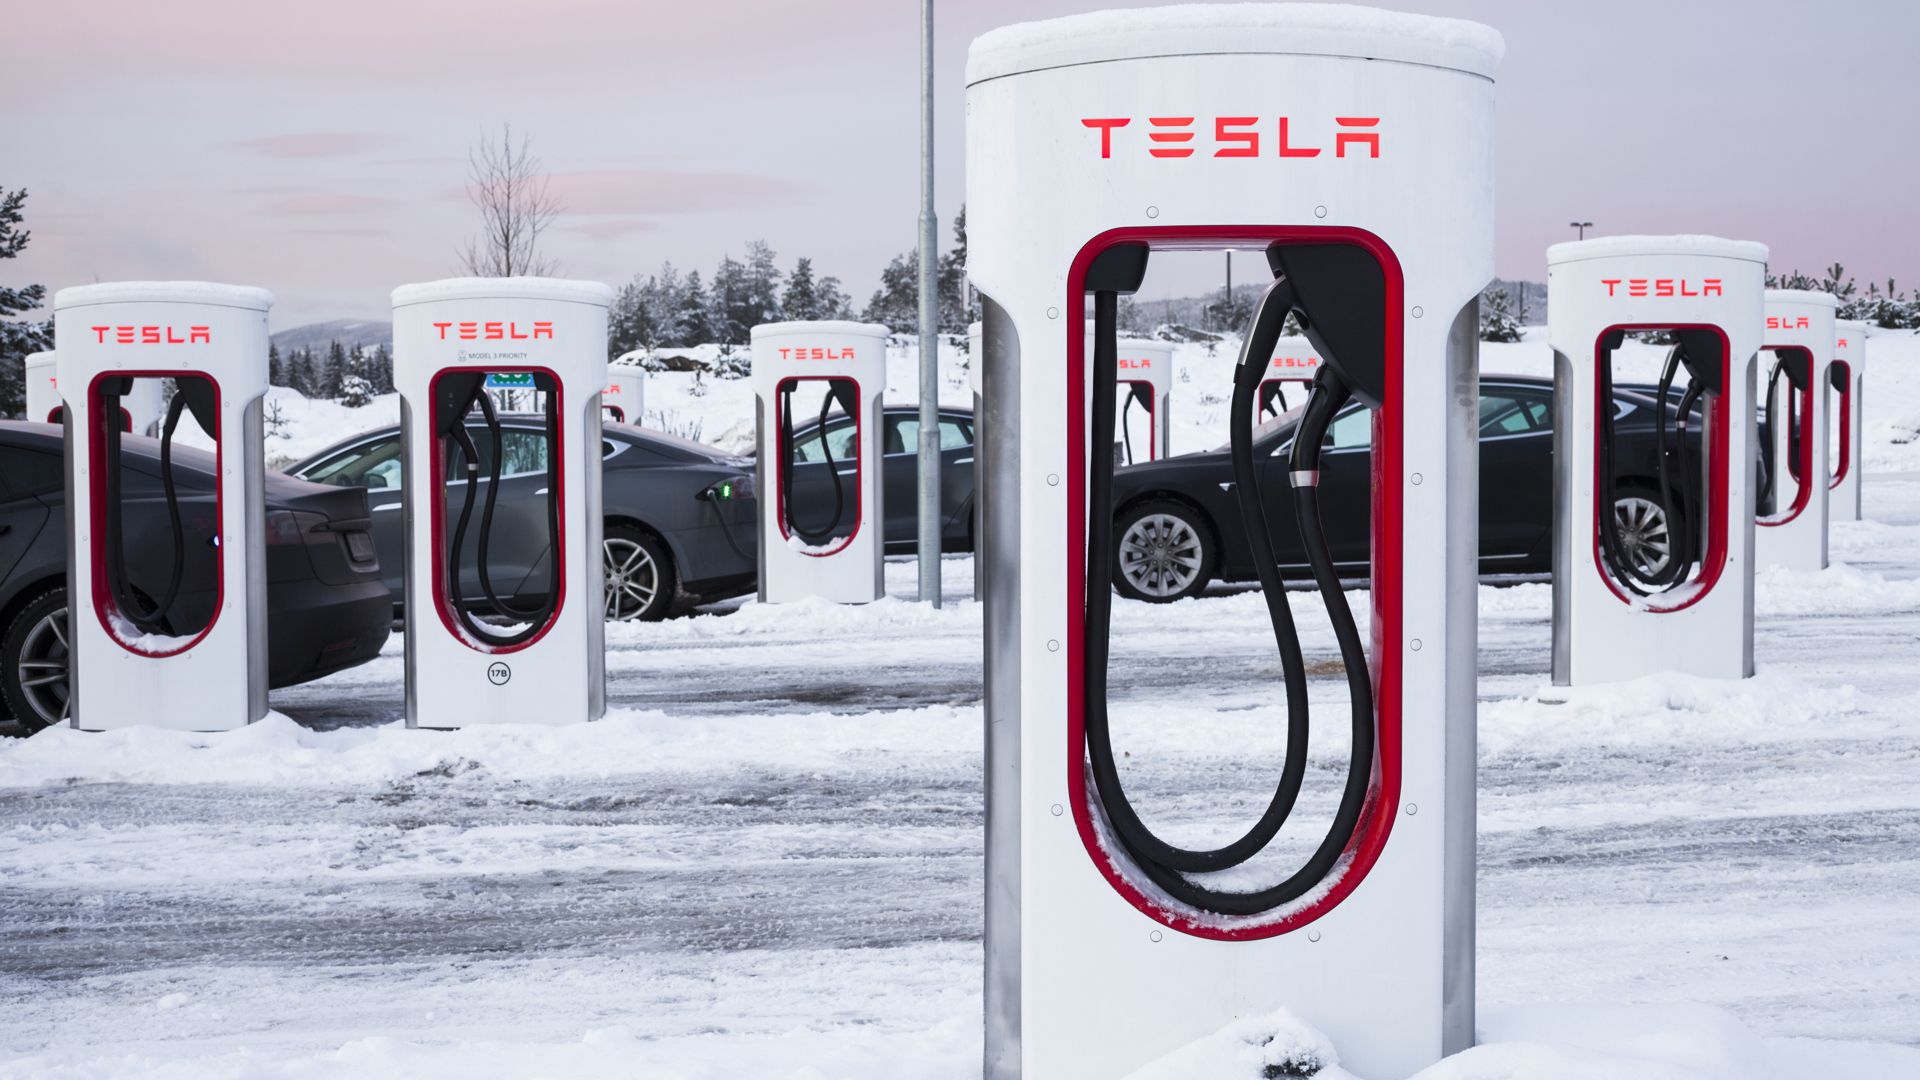 Tesla superchargers in the winter snow